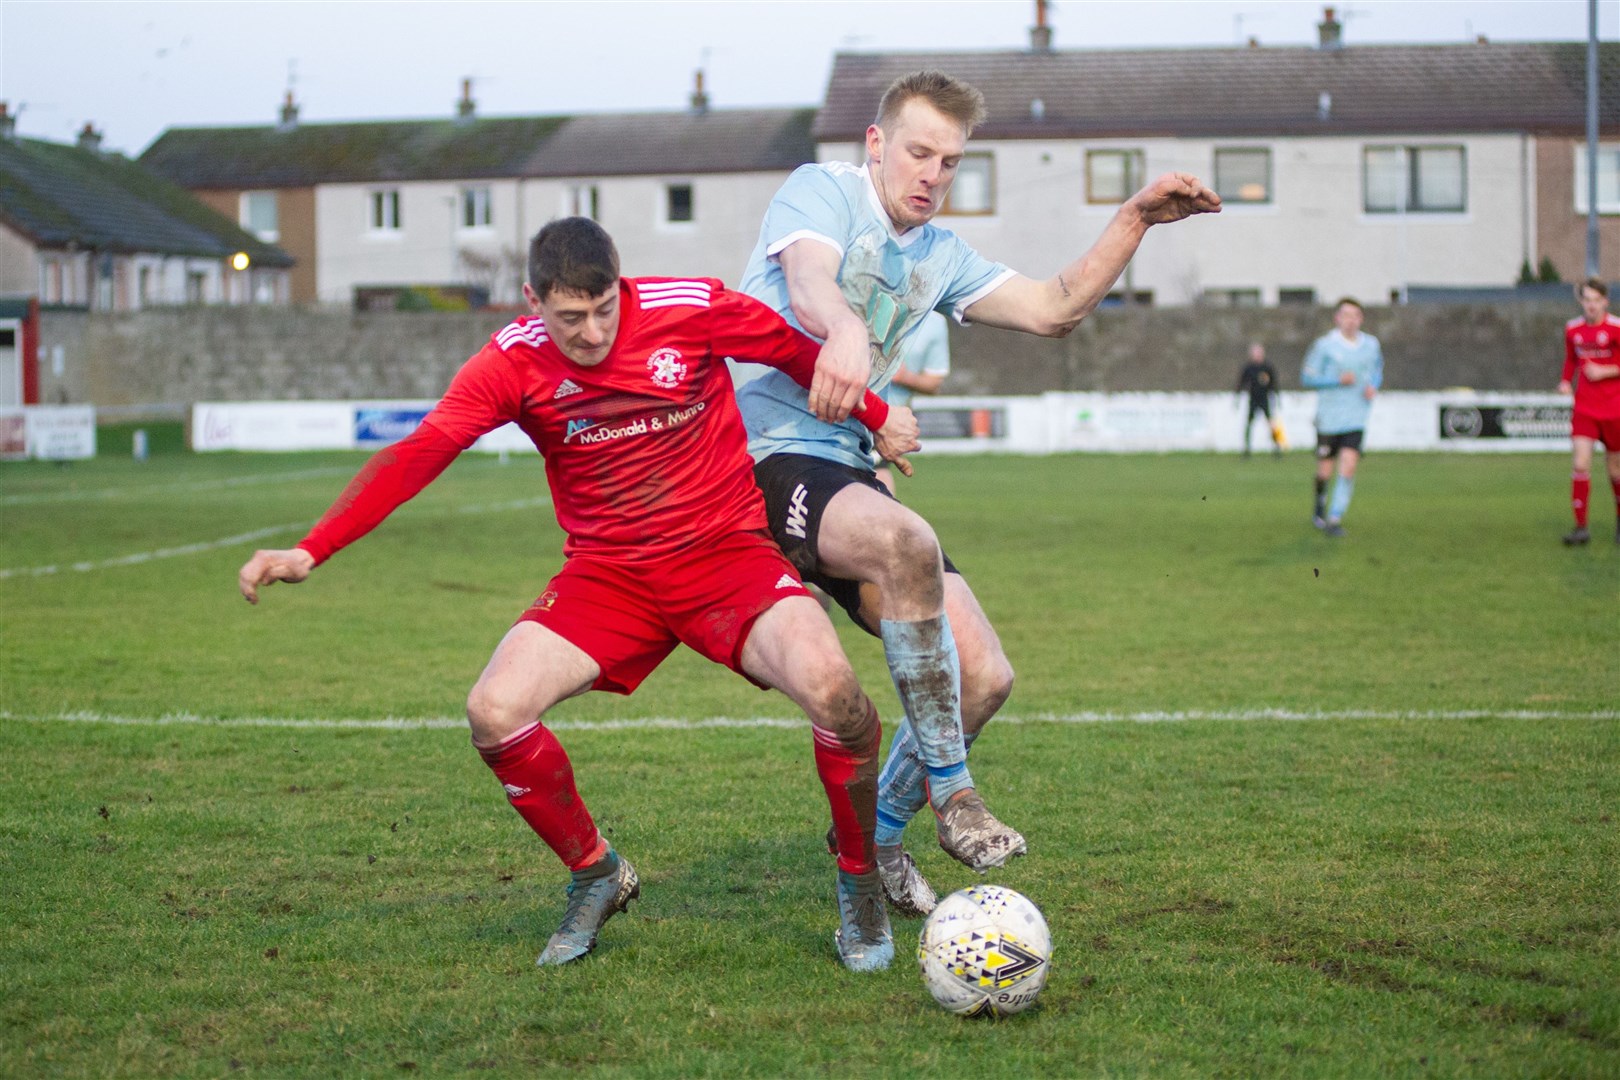 Coasters forward Ross Archibald tussles with Deveronvale full back Aaron Hamilton...Lossiemouth FC (2) vs Deveronvale FC (1) - Highland Football League - Grant Park, Lossimouth 05/02/2022...Picture: Daniel Forsyth..